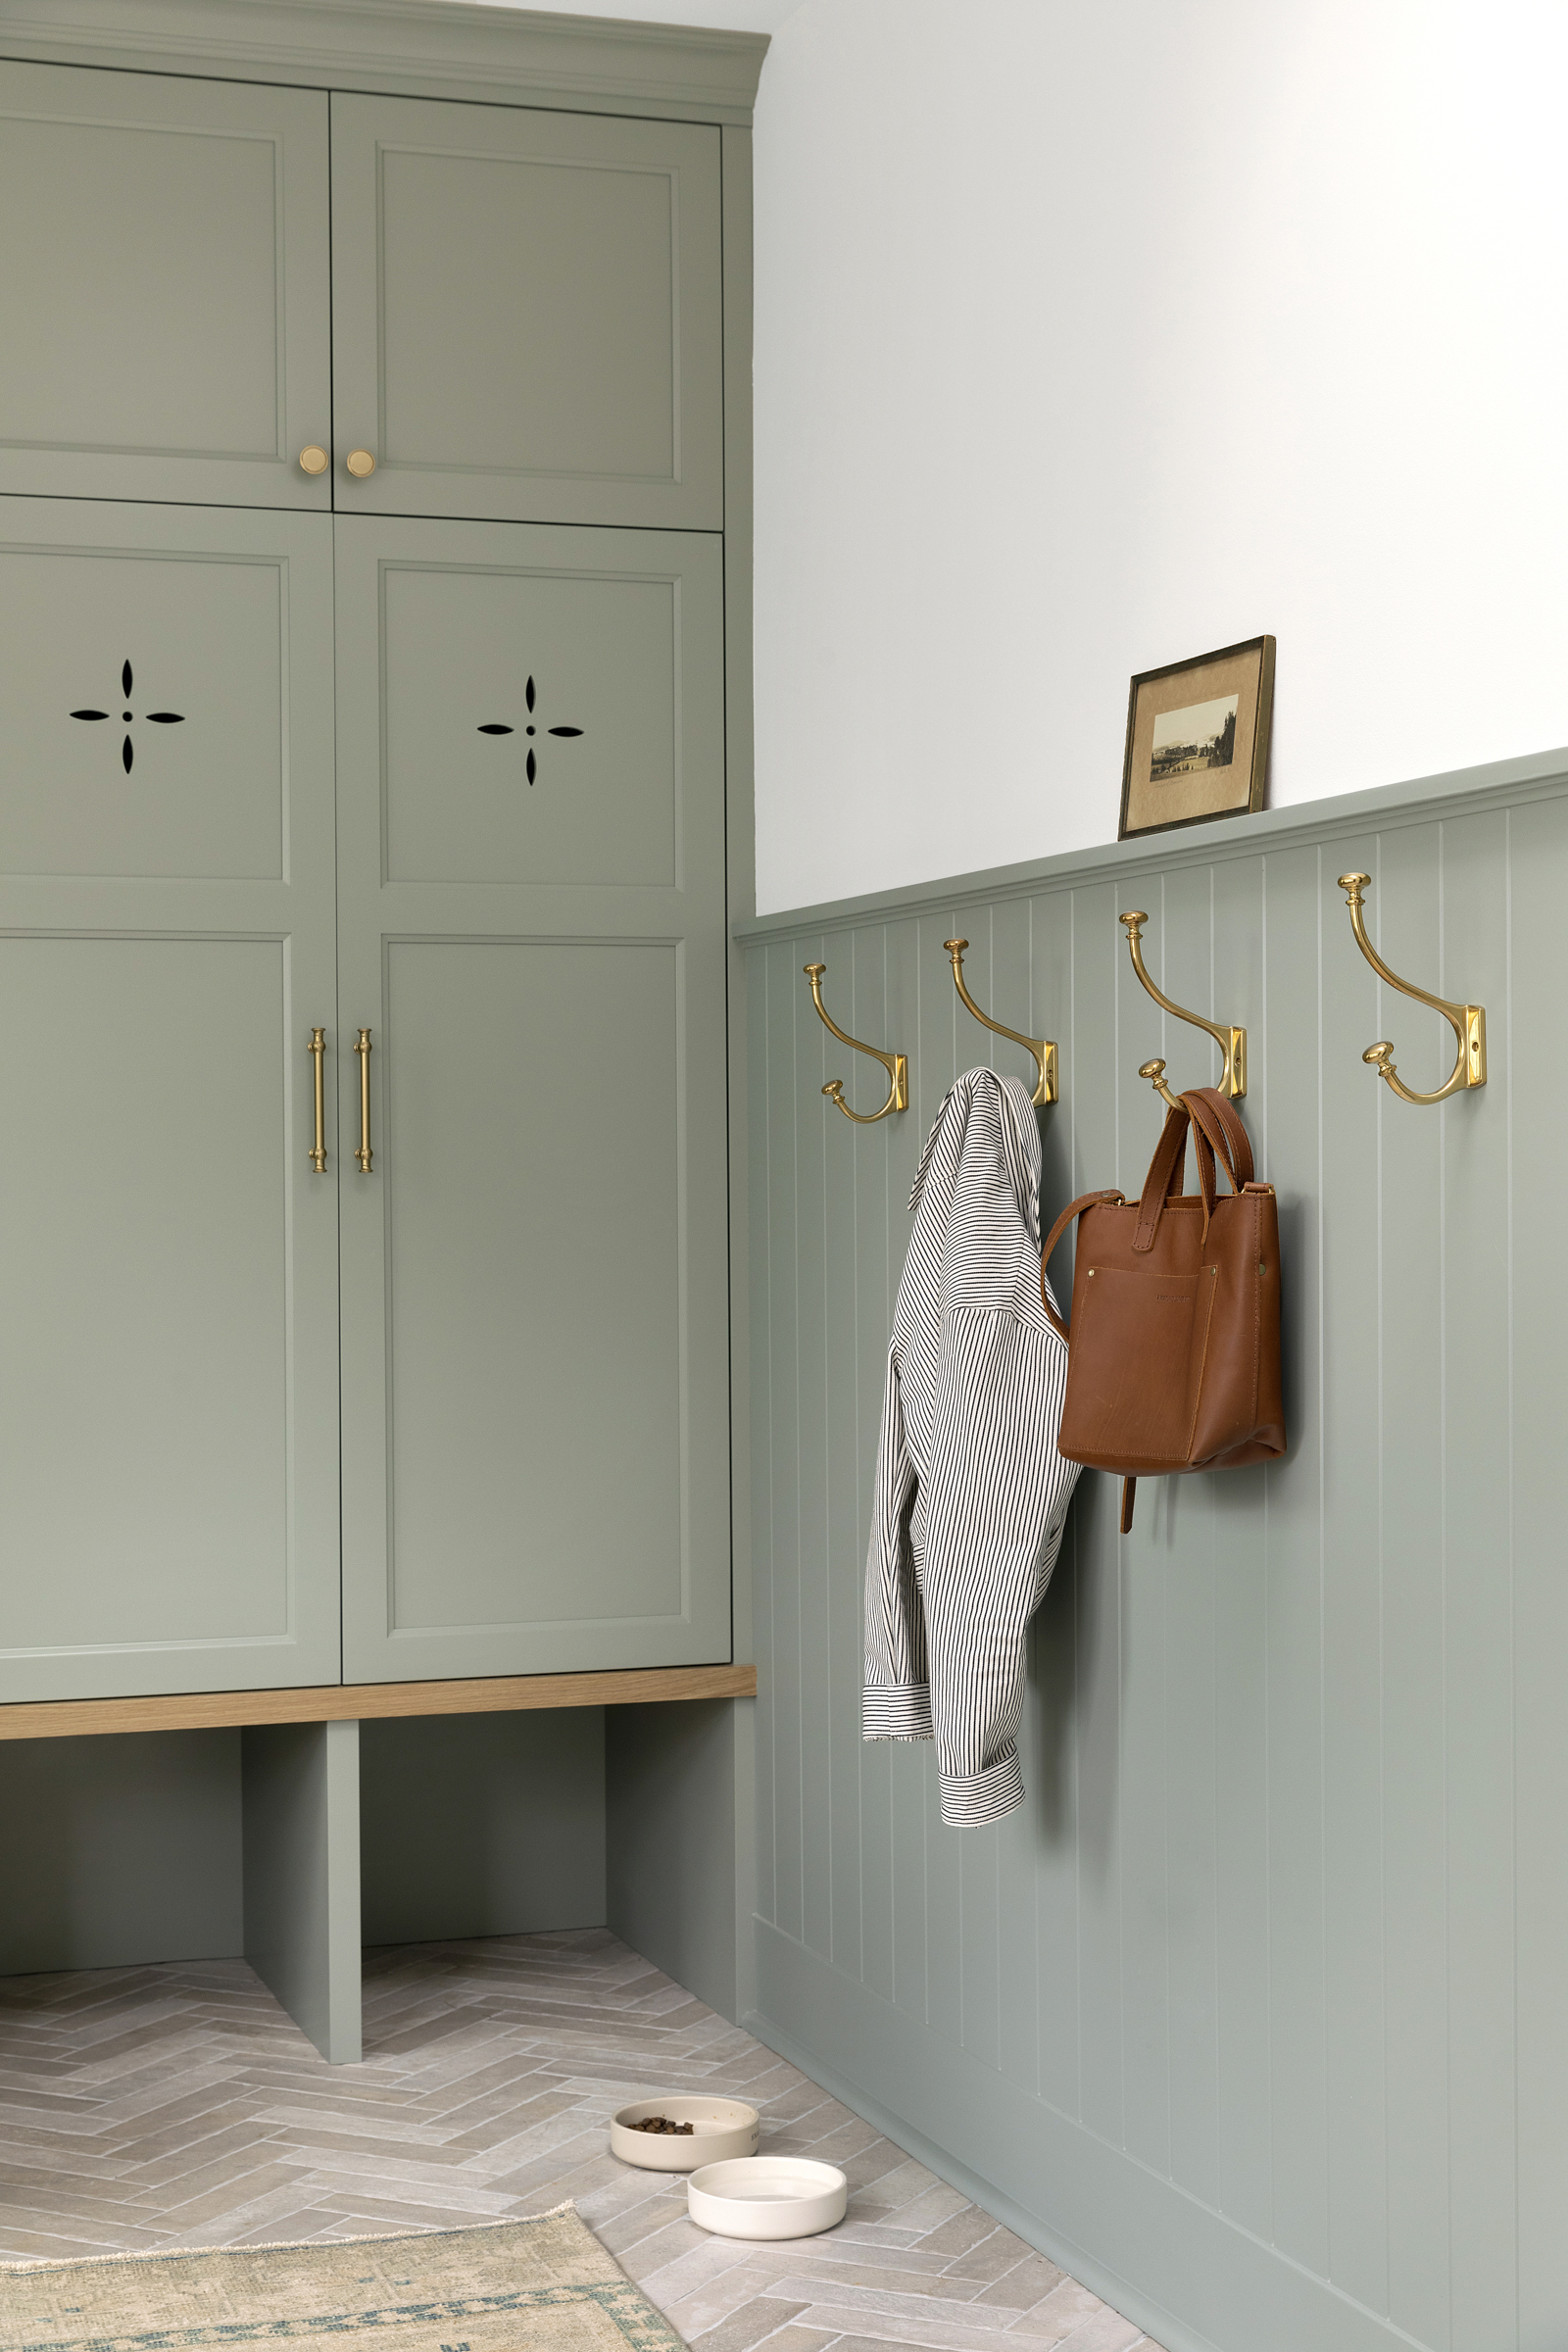 Twin Cities mudroom renovation with light green custom cubbies, ventilation details, and brass coat hooks.